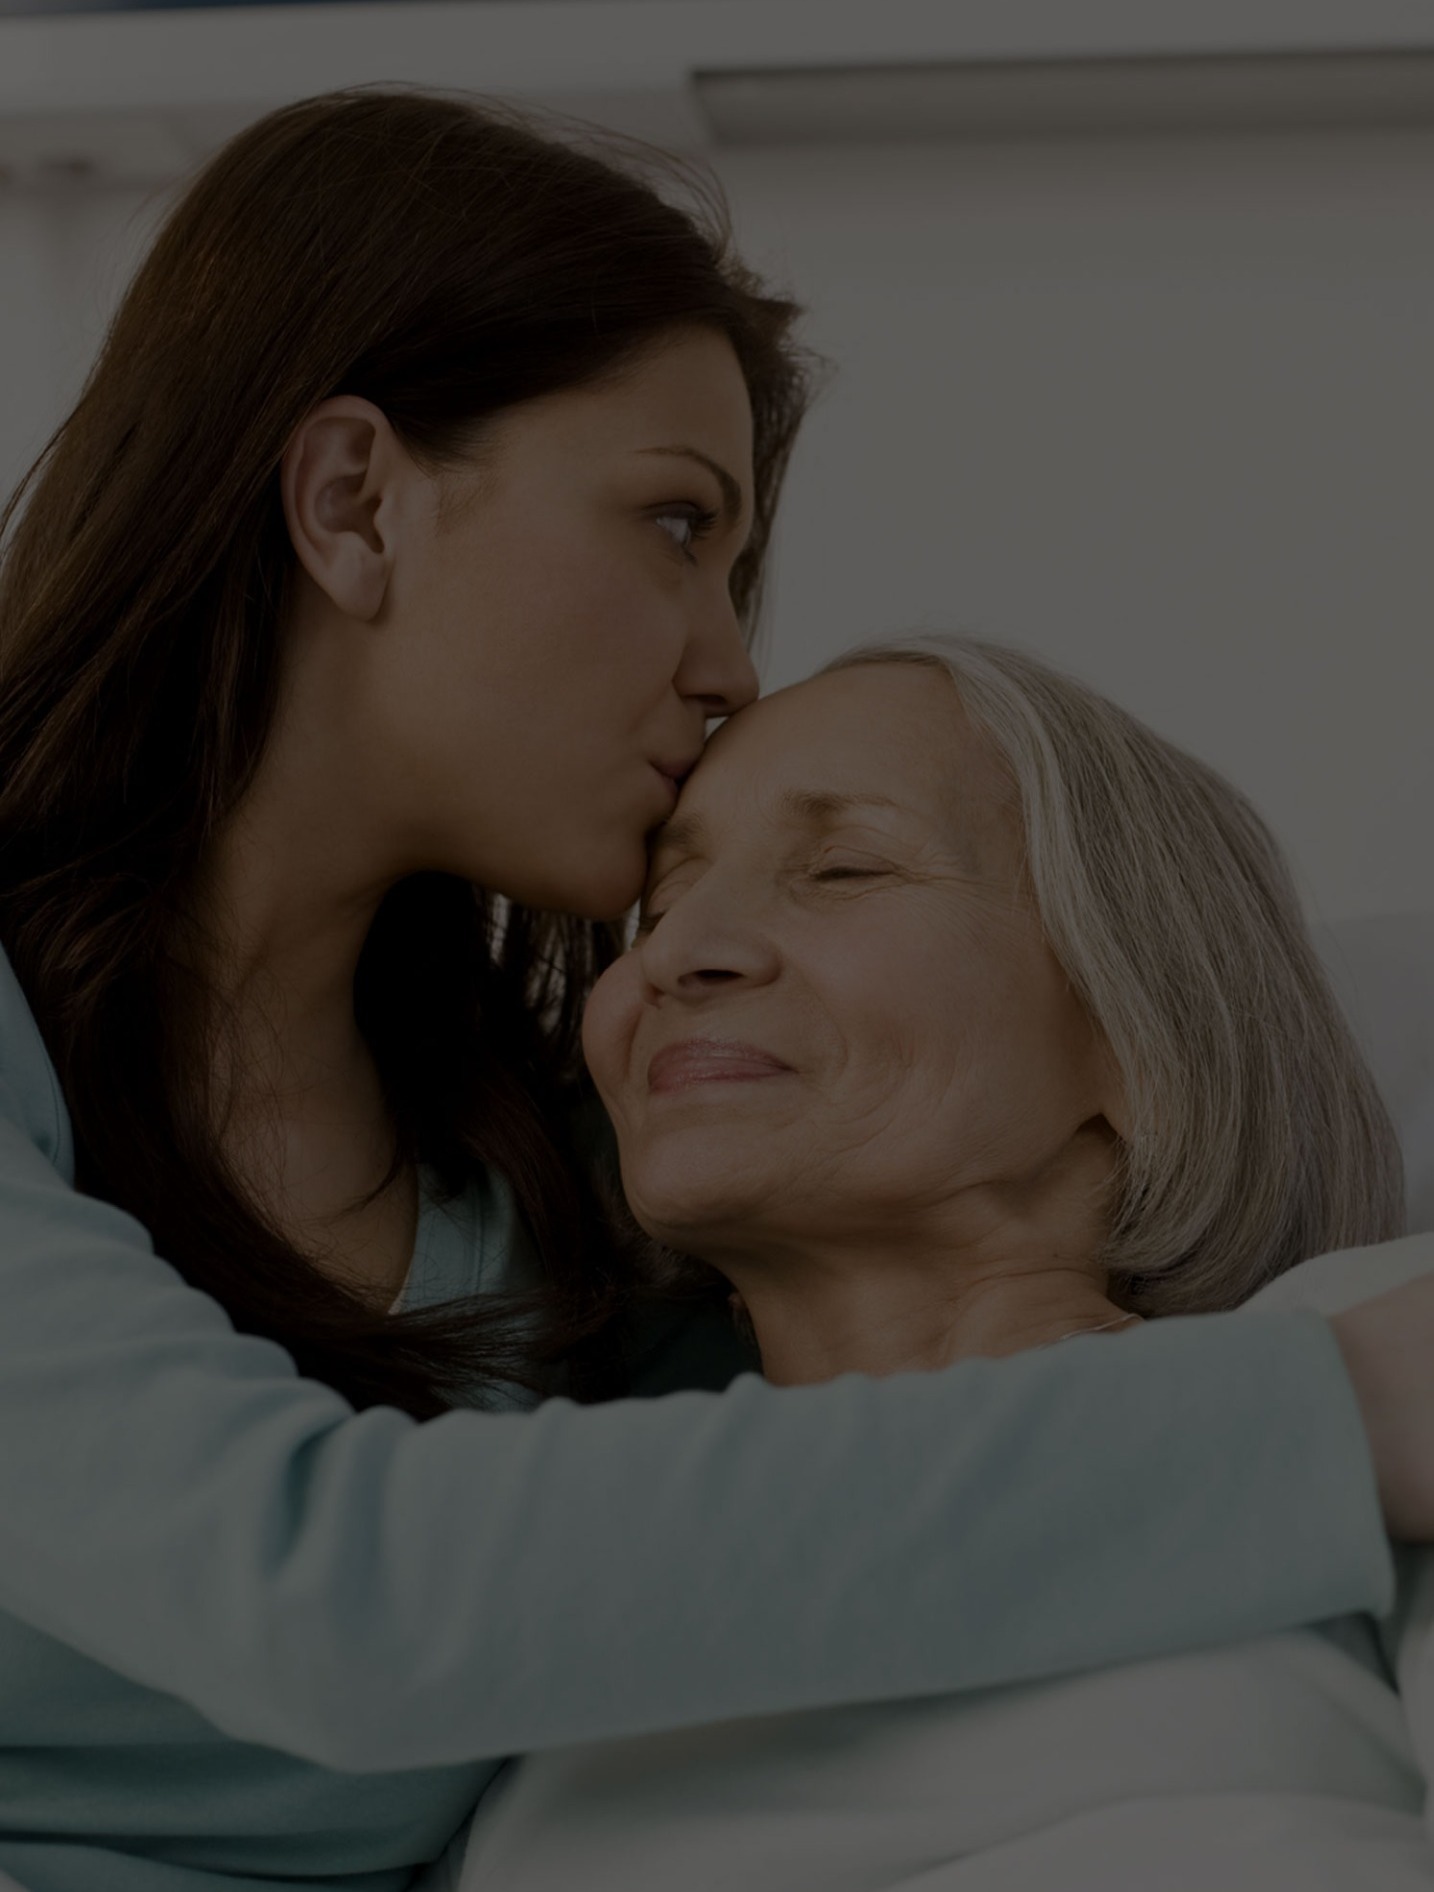 A mother and daughter embracing after discussing available homecare services